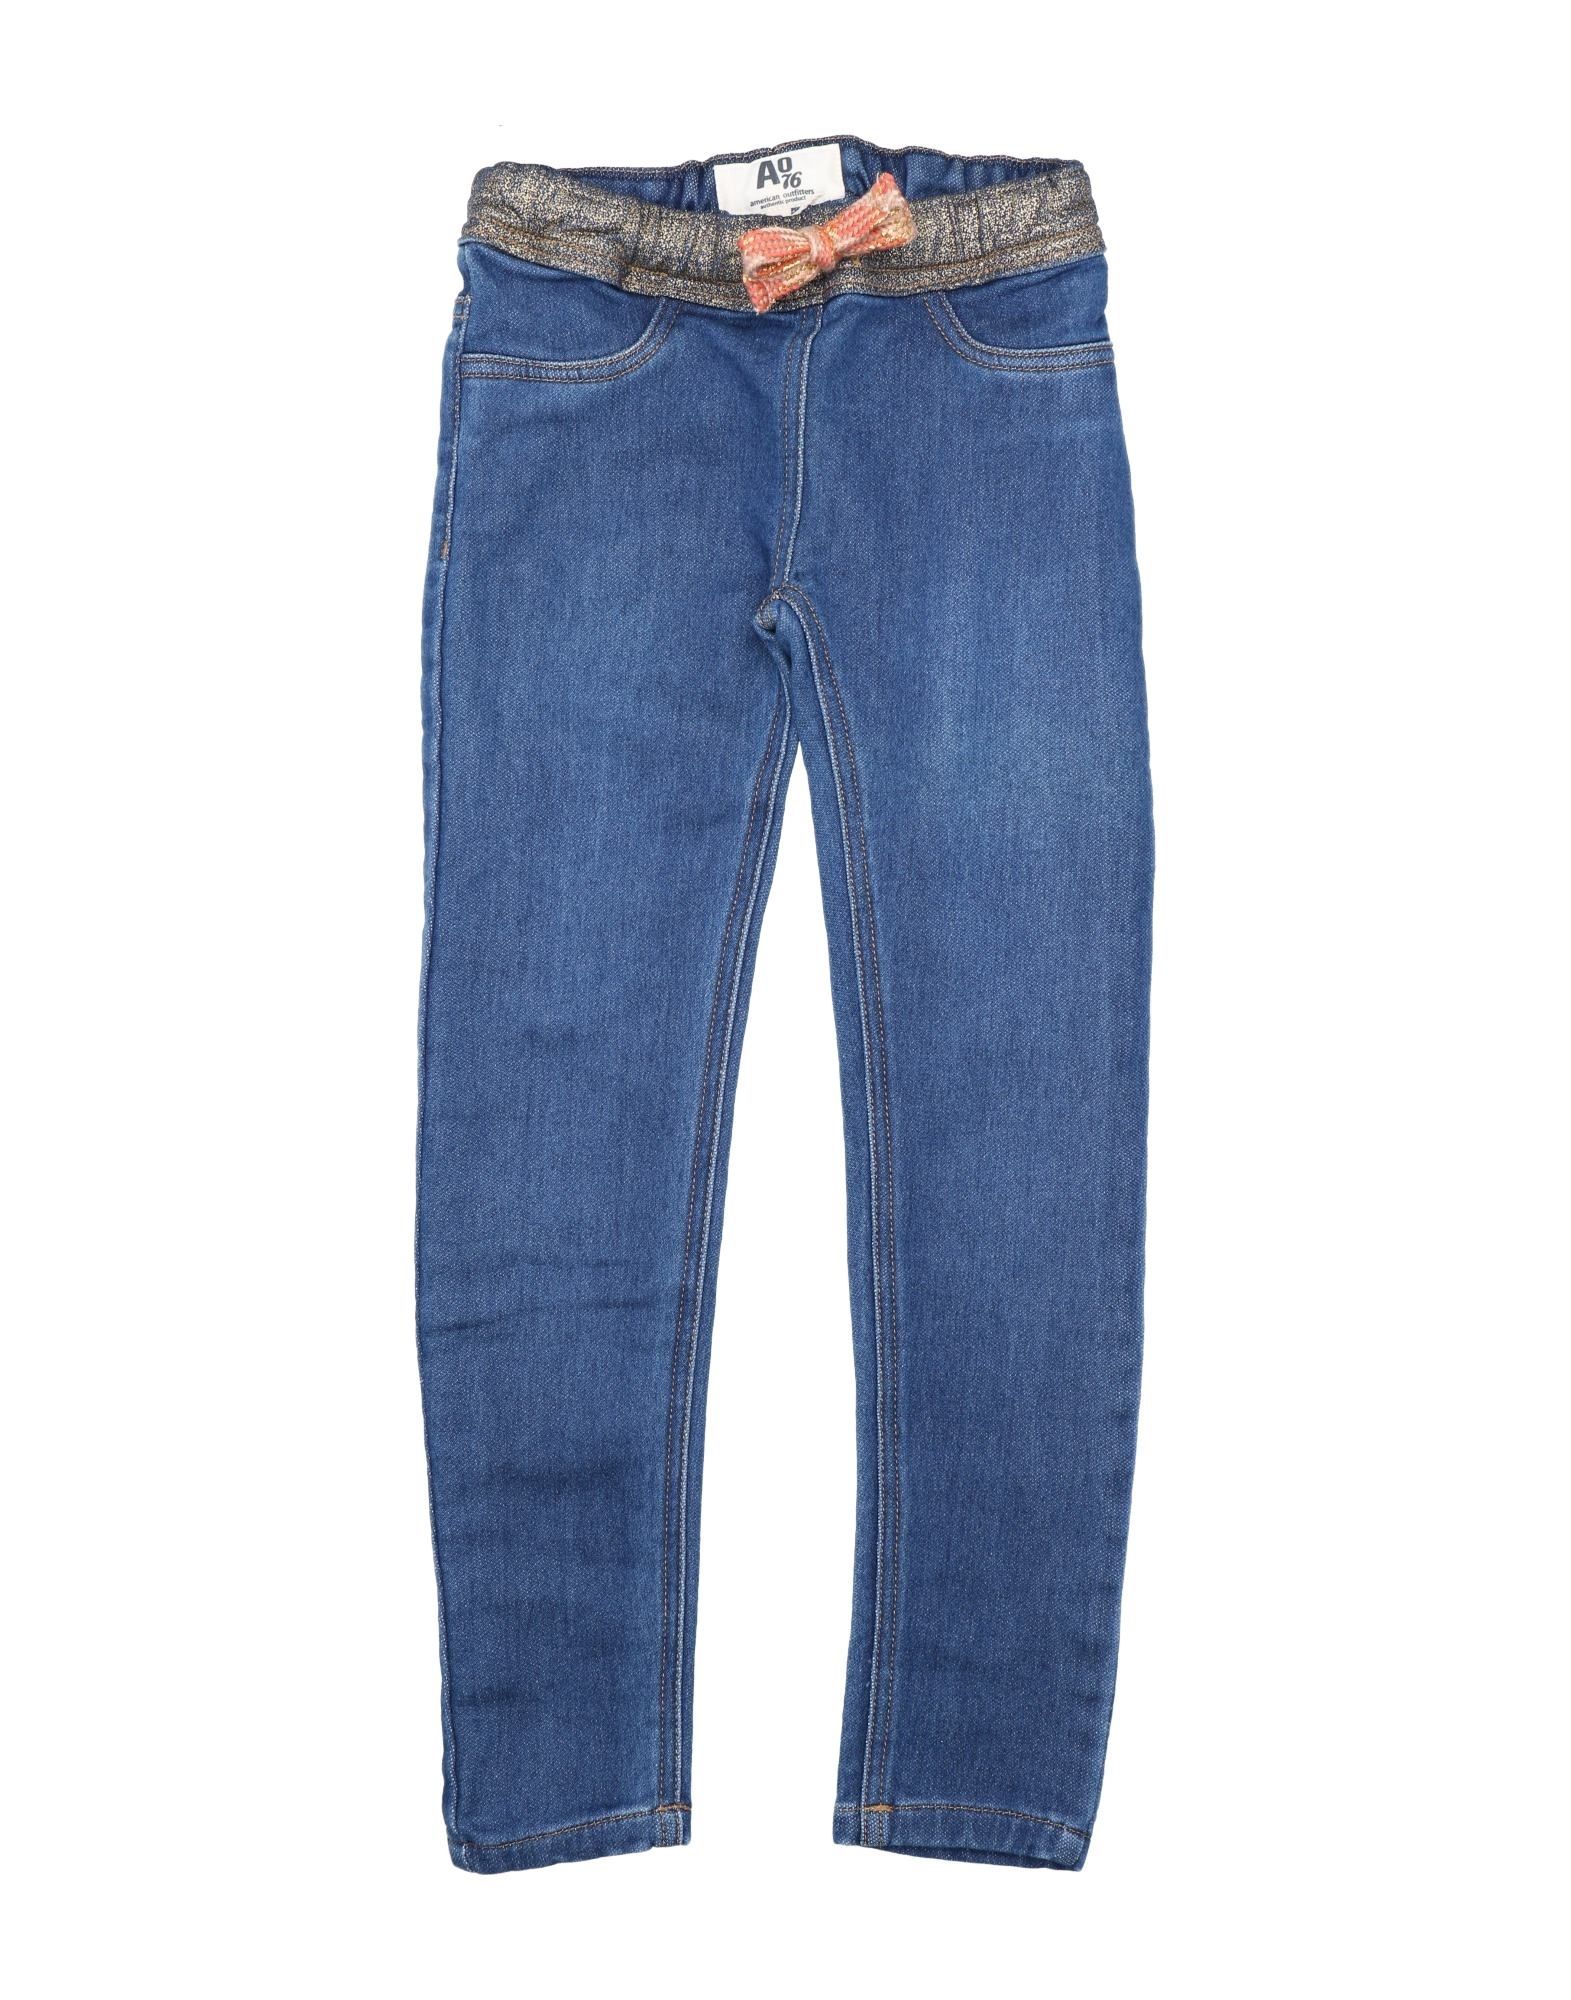 American Outfitters Kids' Jeans In Blue